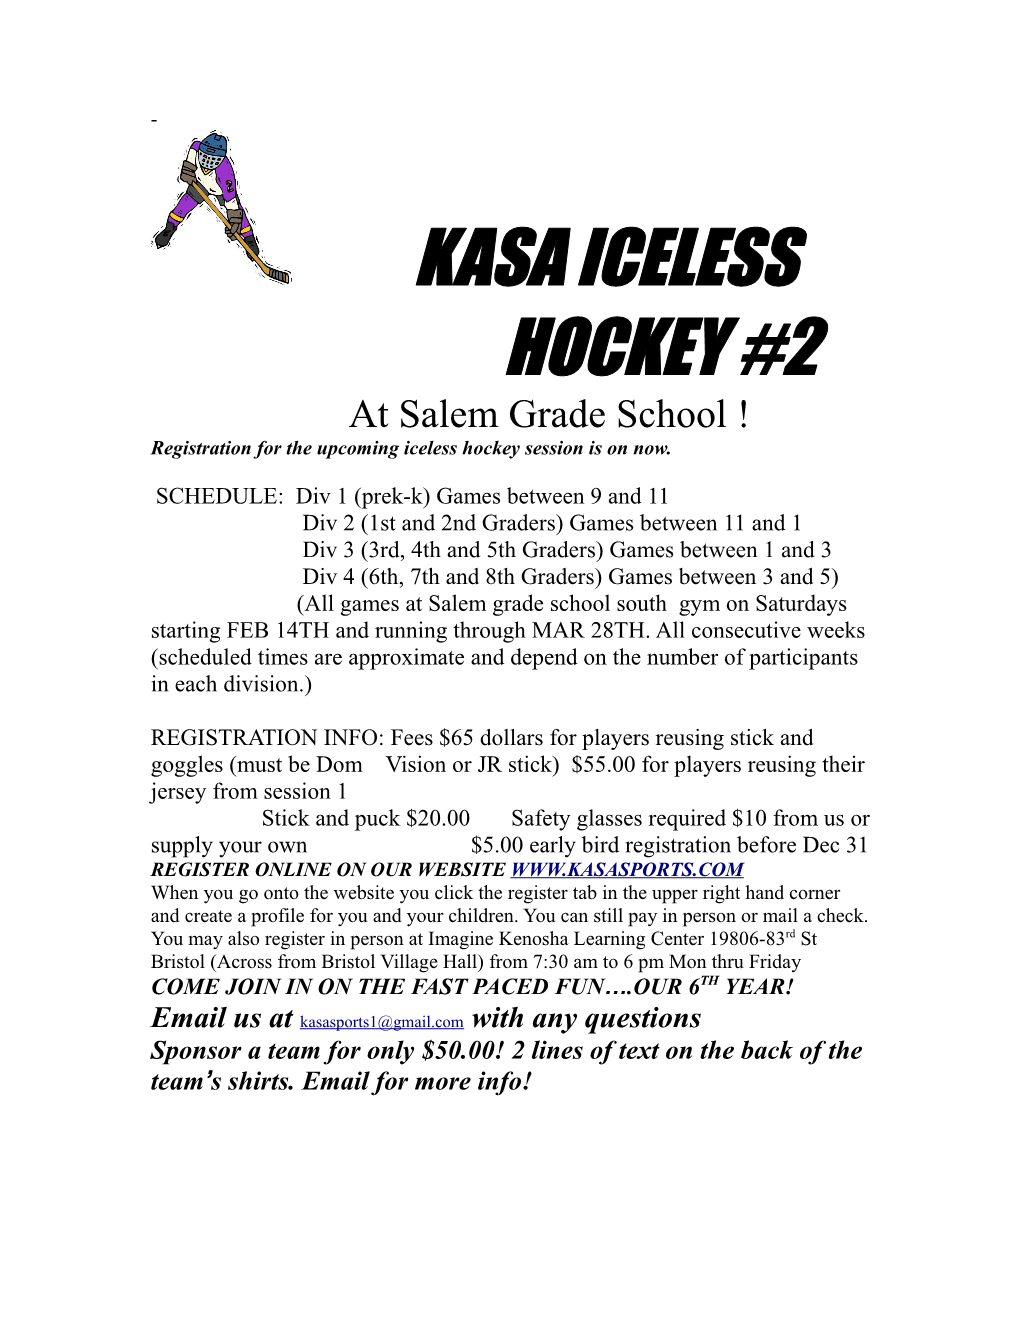 Registration for the Upcoming Iceless Hockey Session Is on Now